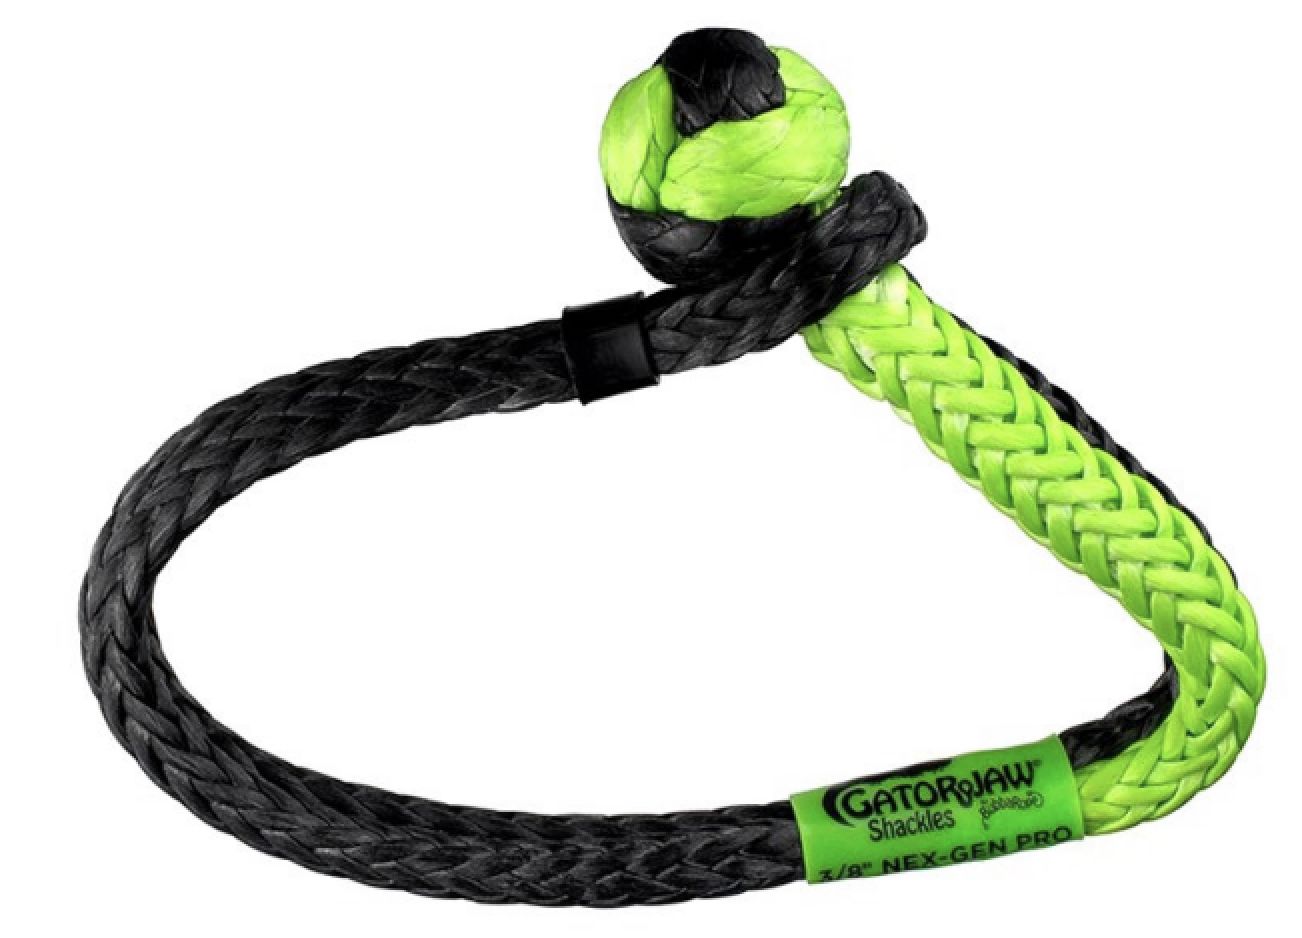 Bubba Rope 176746NGGB - 3/8" NexGen PRO Gator-Jaw Series Synthetic Soft Shackle with Green/Black Eyes